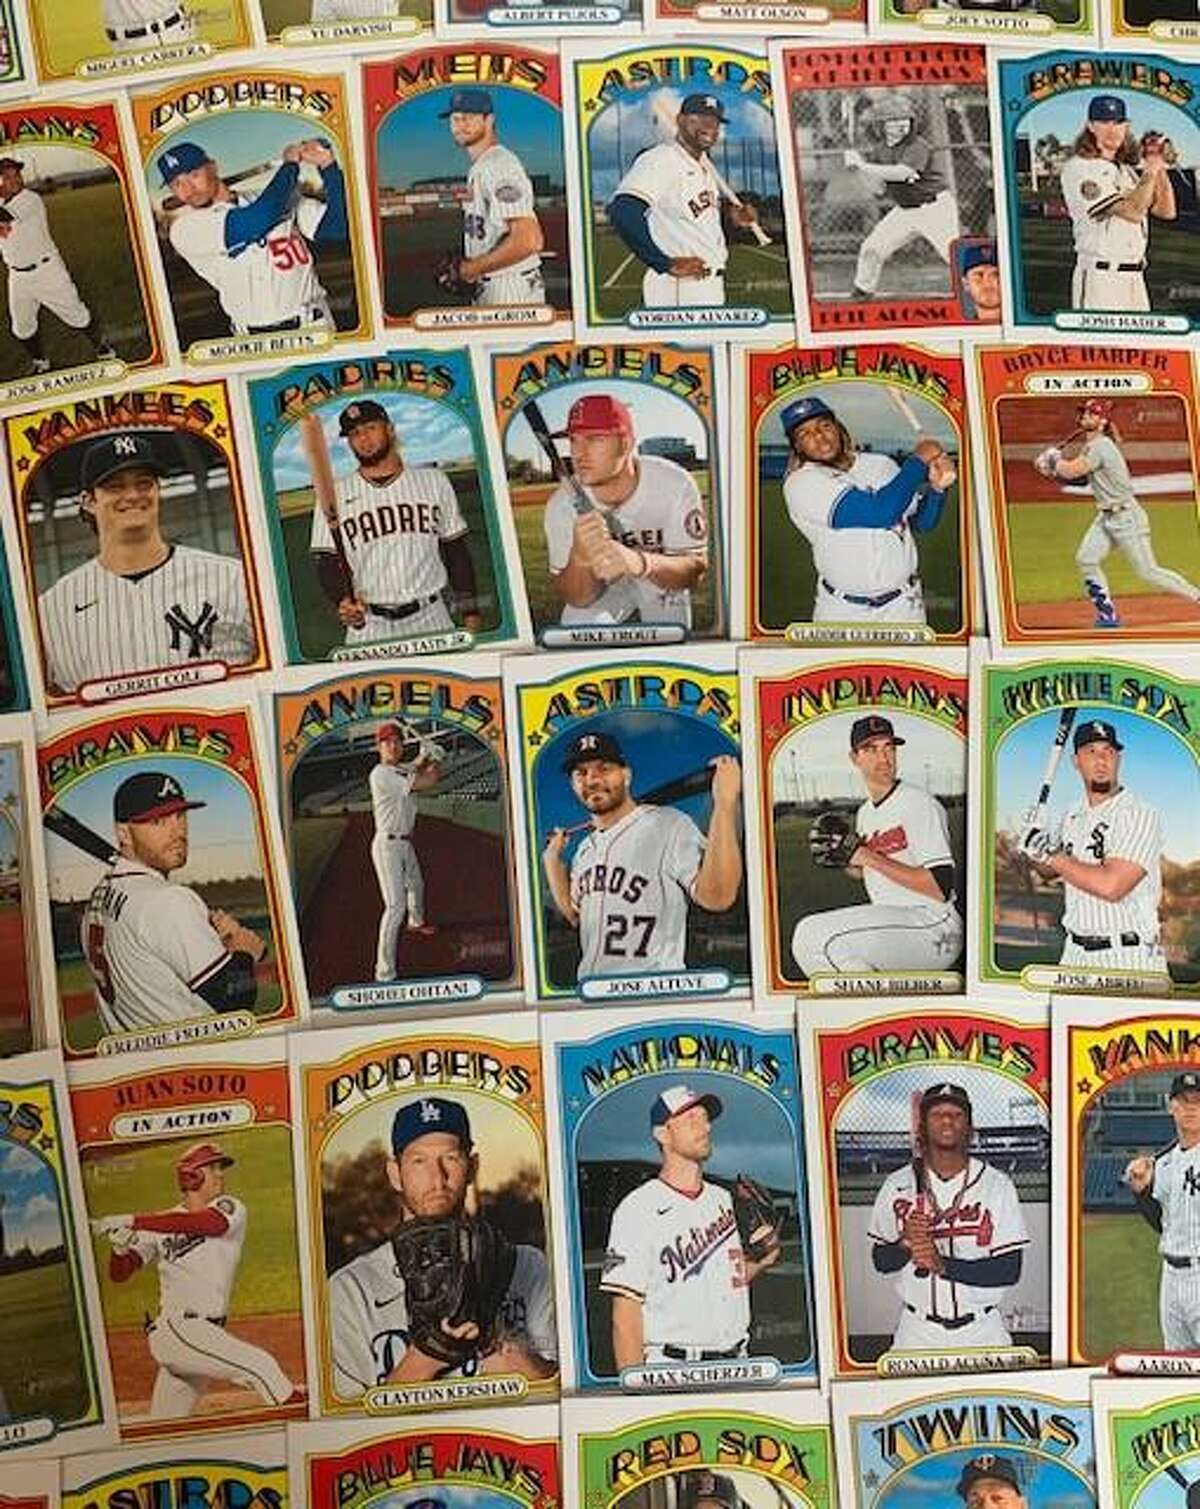 Dead or alive? The players and managers in the 1972 Topps baseball set